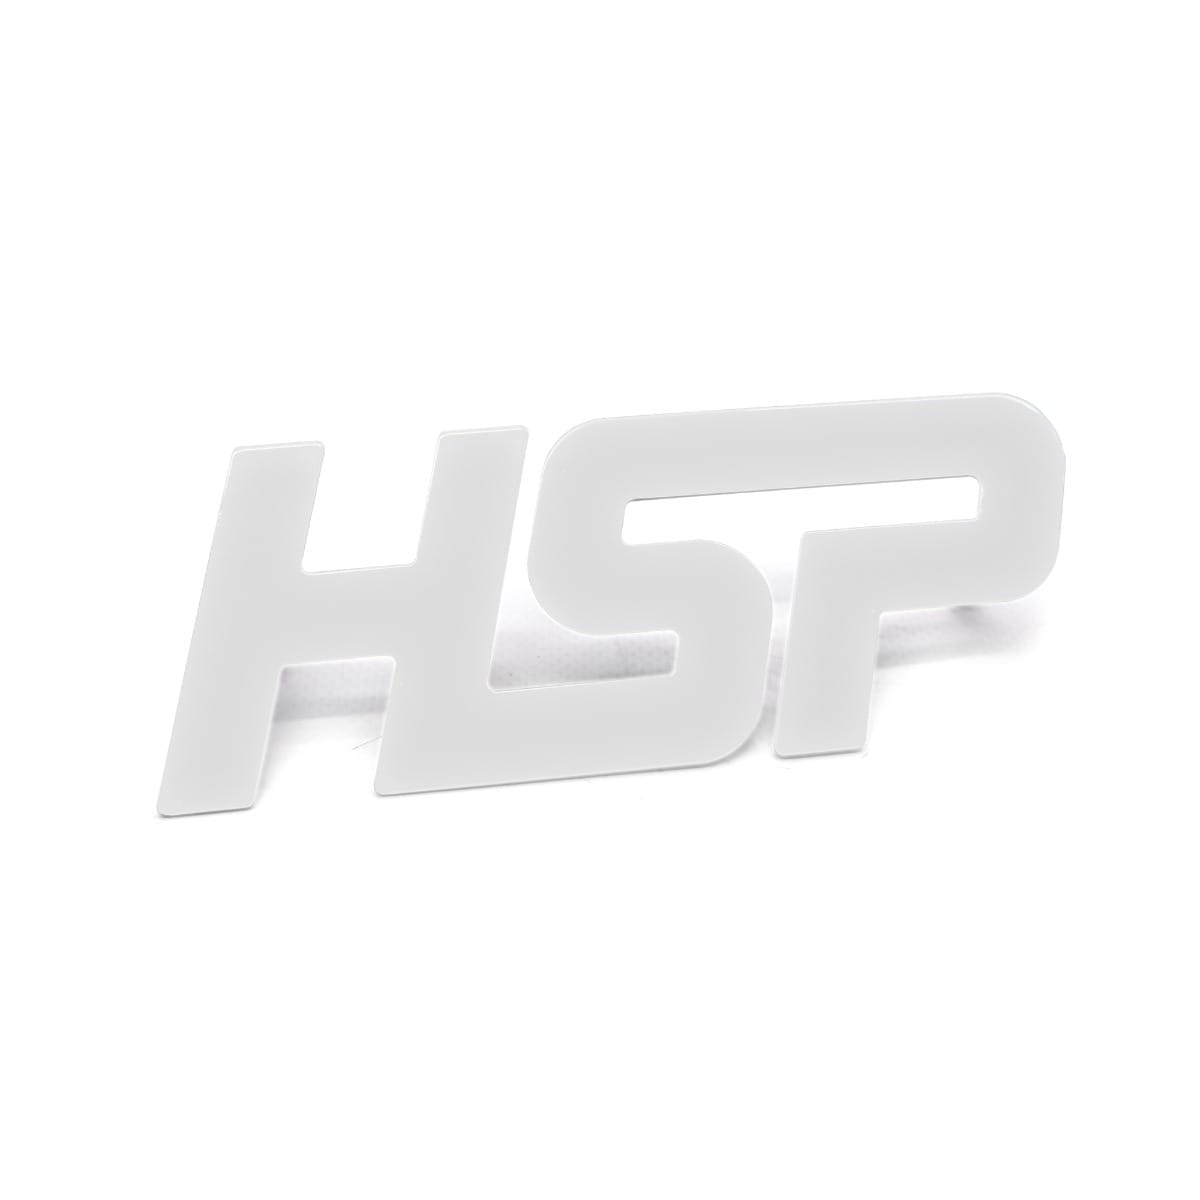 HSP Universal Grill Badge